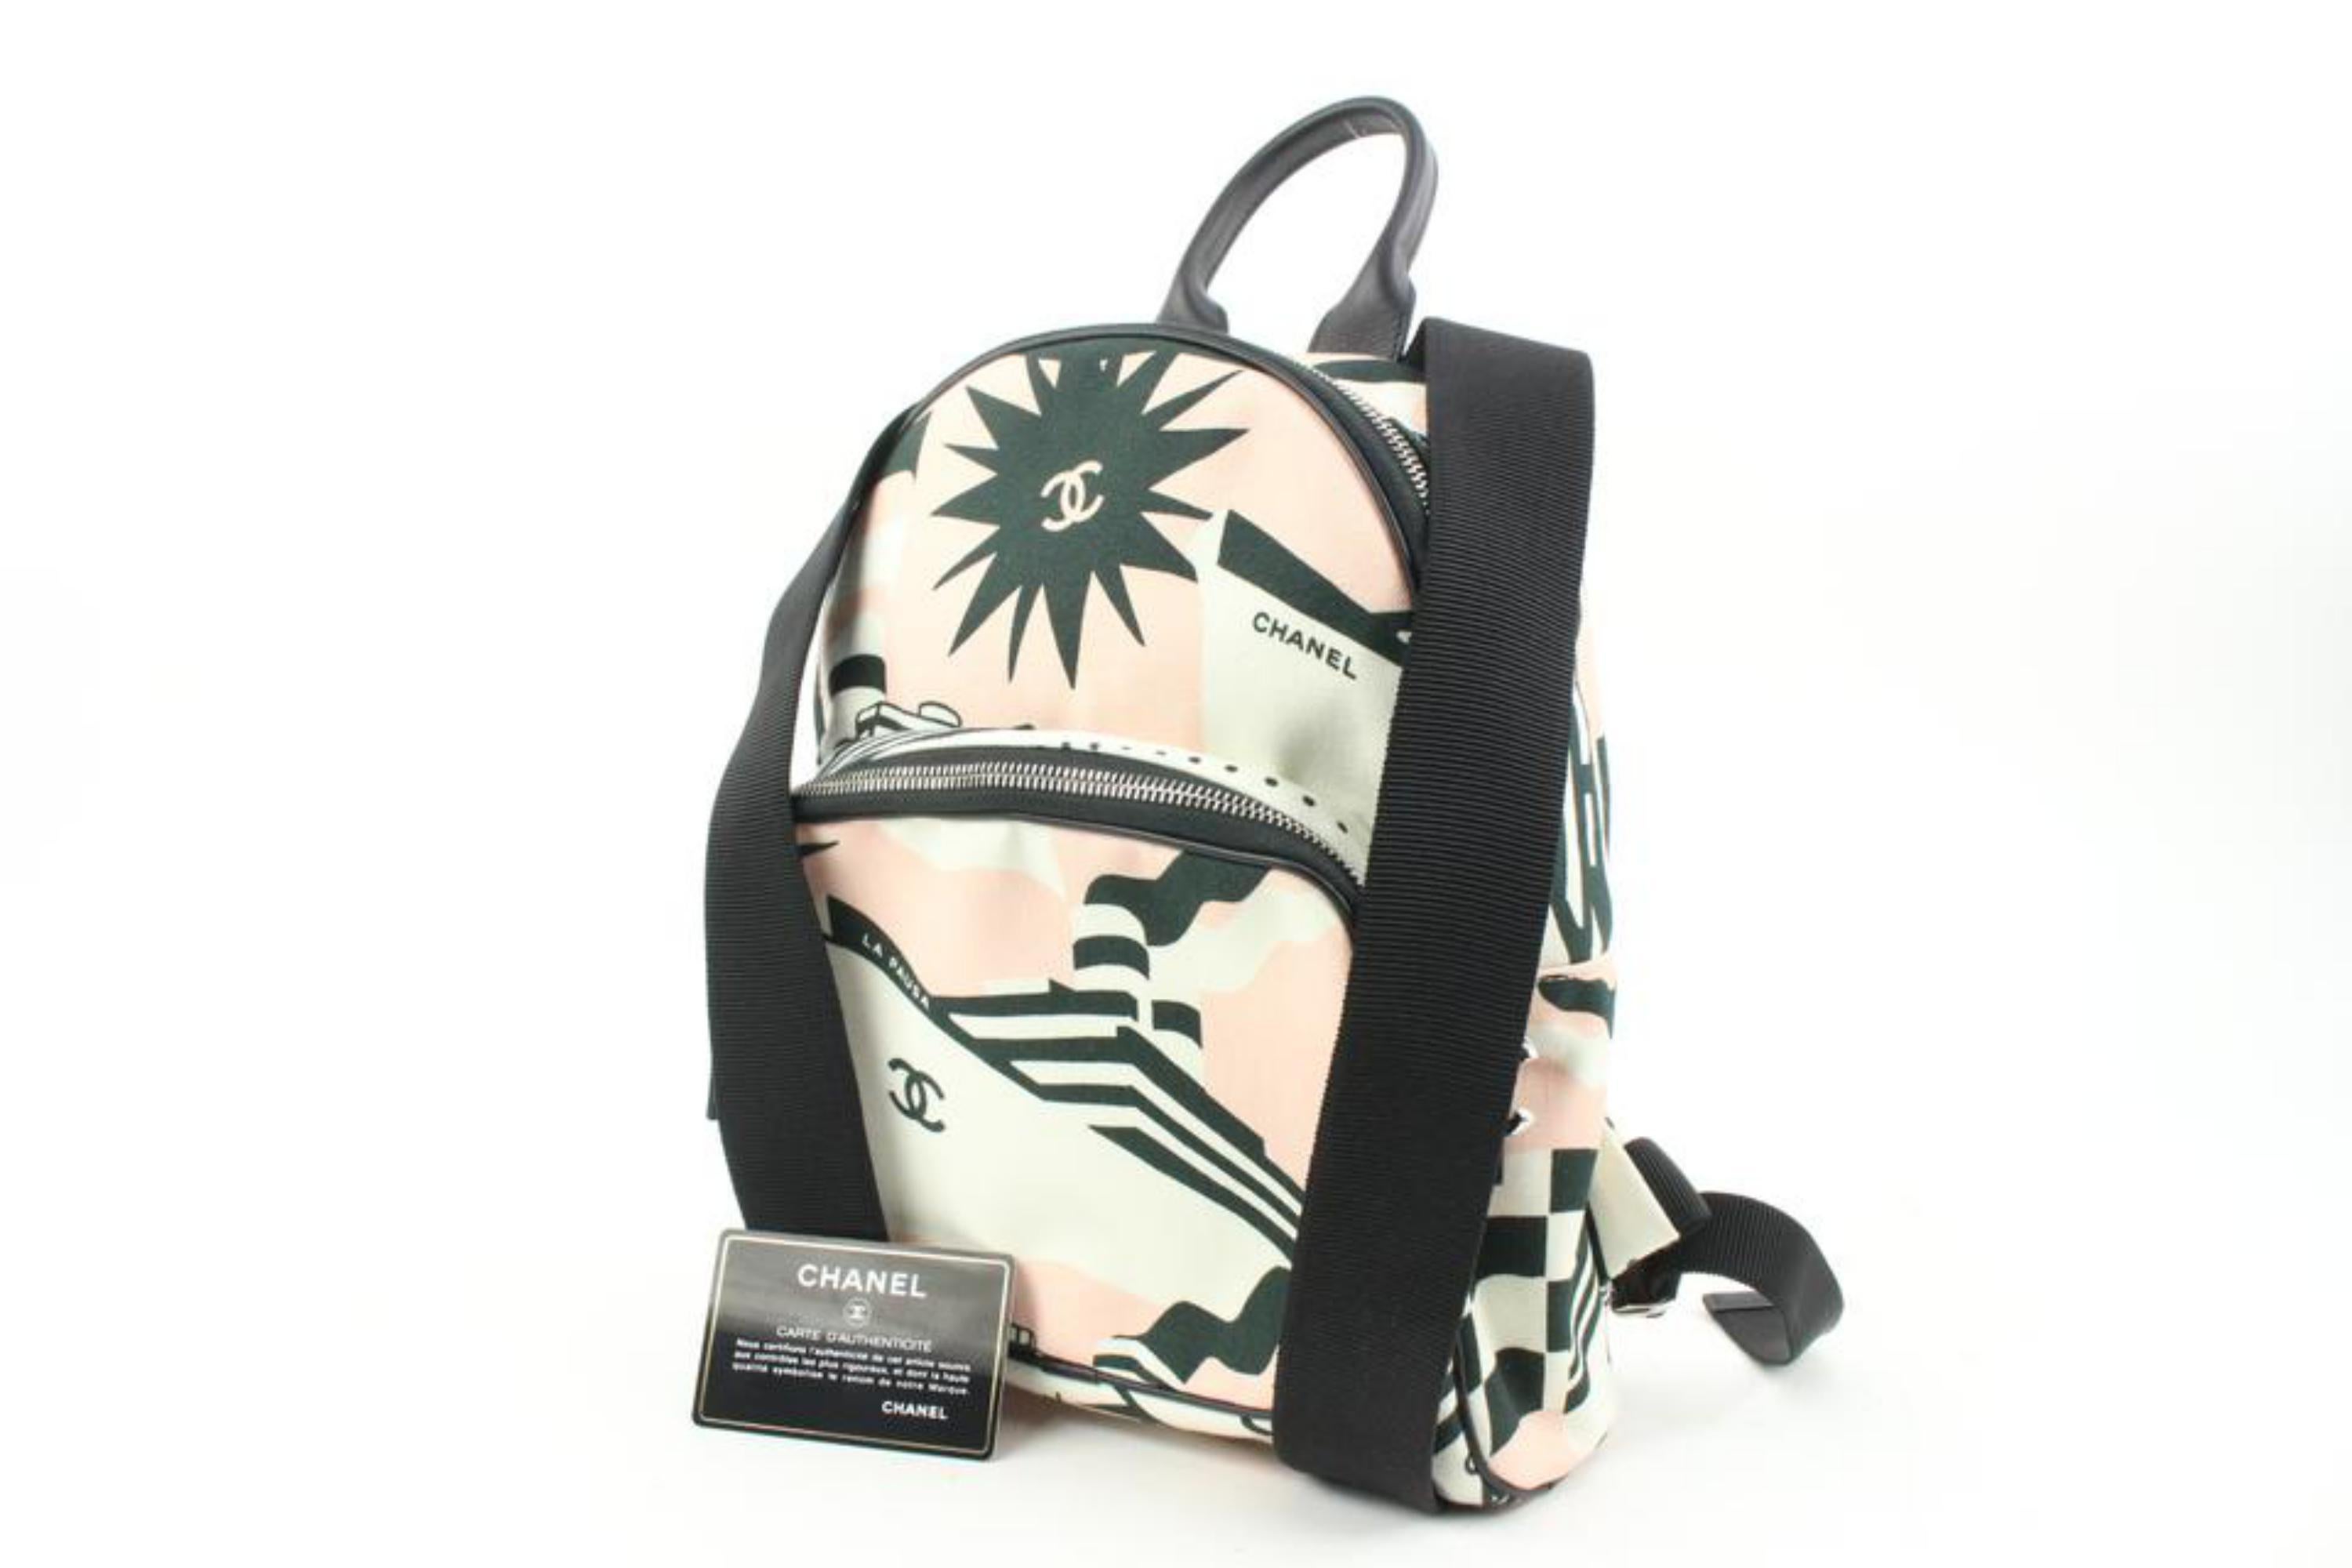 Chanel La Pausa Bay Printed Canvas Medium Backpack Limited Cruise s214ca74
Date Code/Serial Number: 27042049
Made In: Italy
Measurements: Length:  9